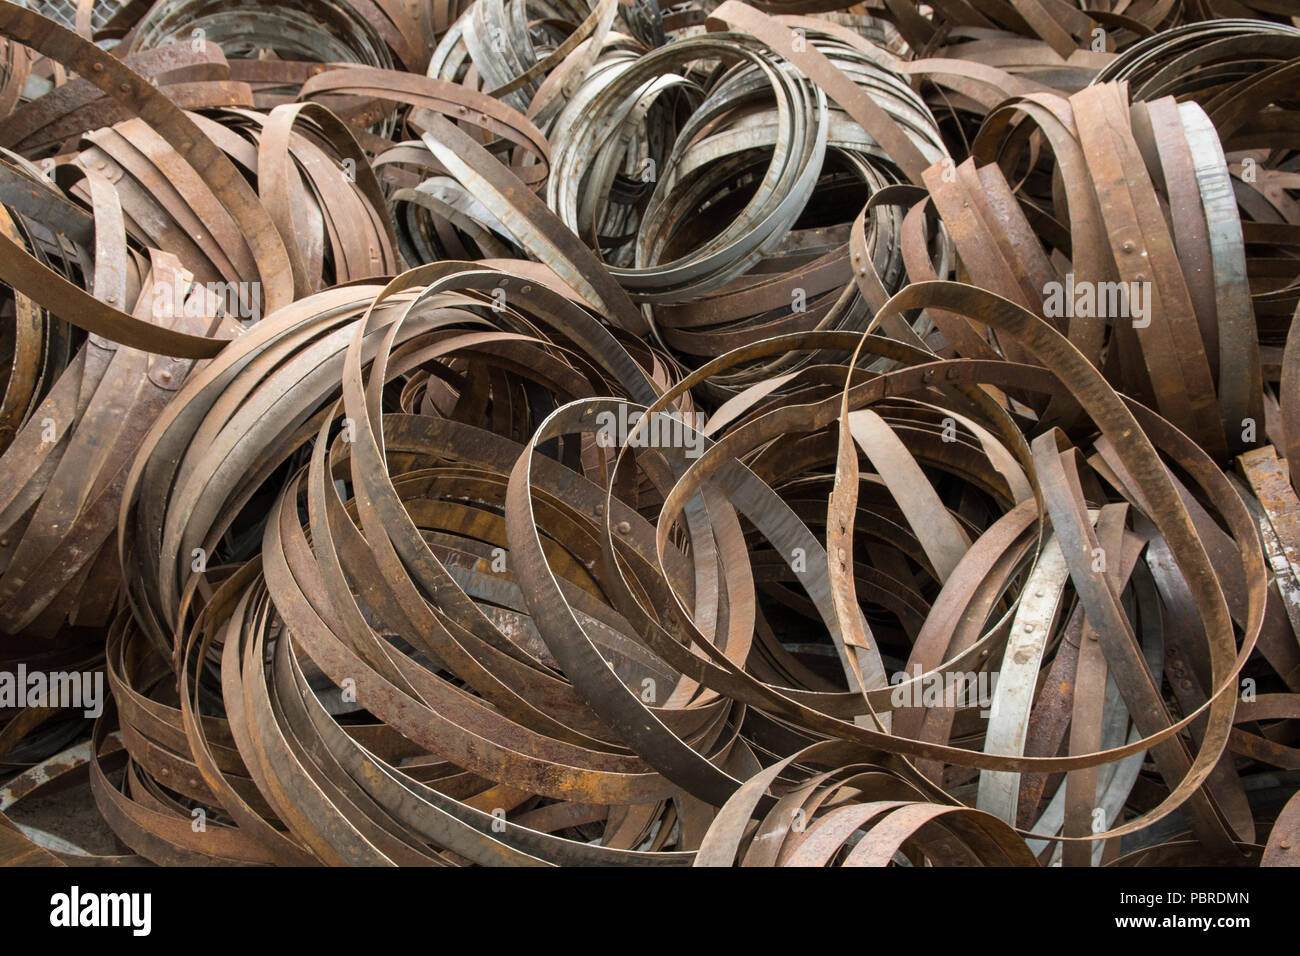 large pile of rusty Barrel hoops Stock Photo